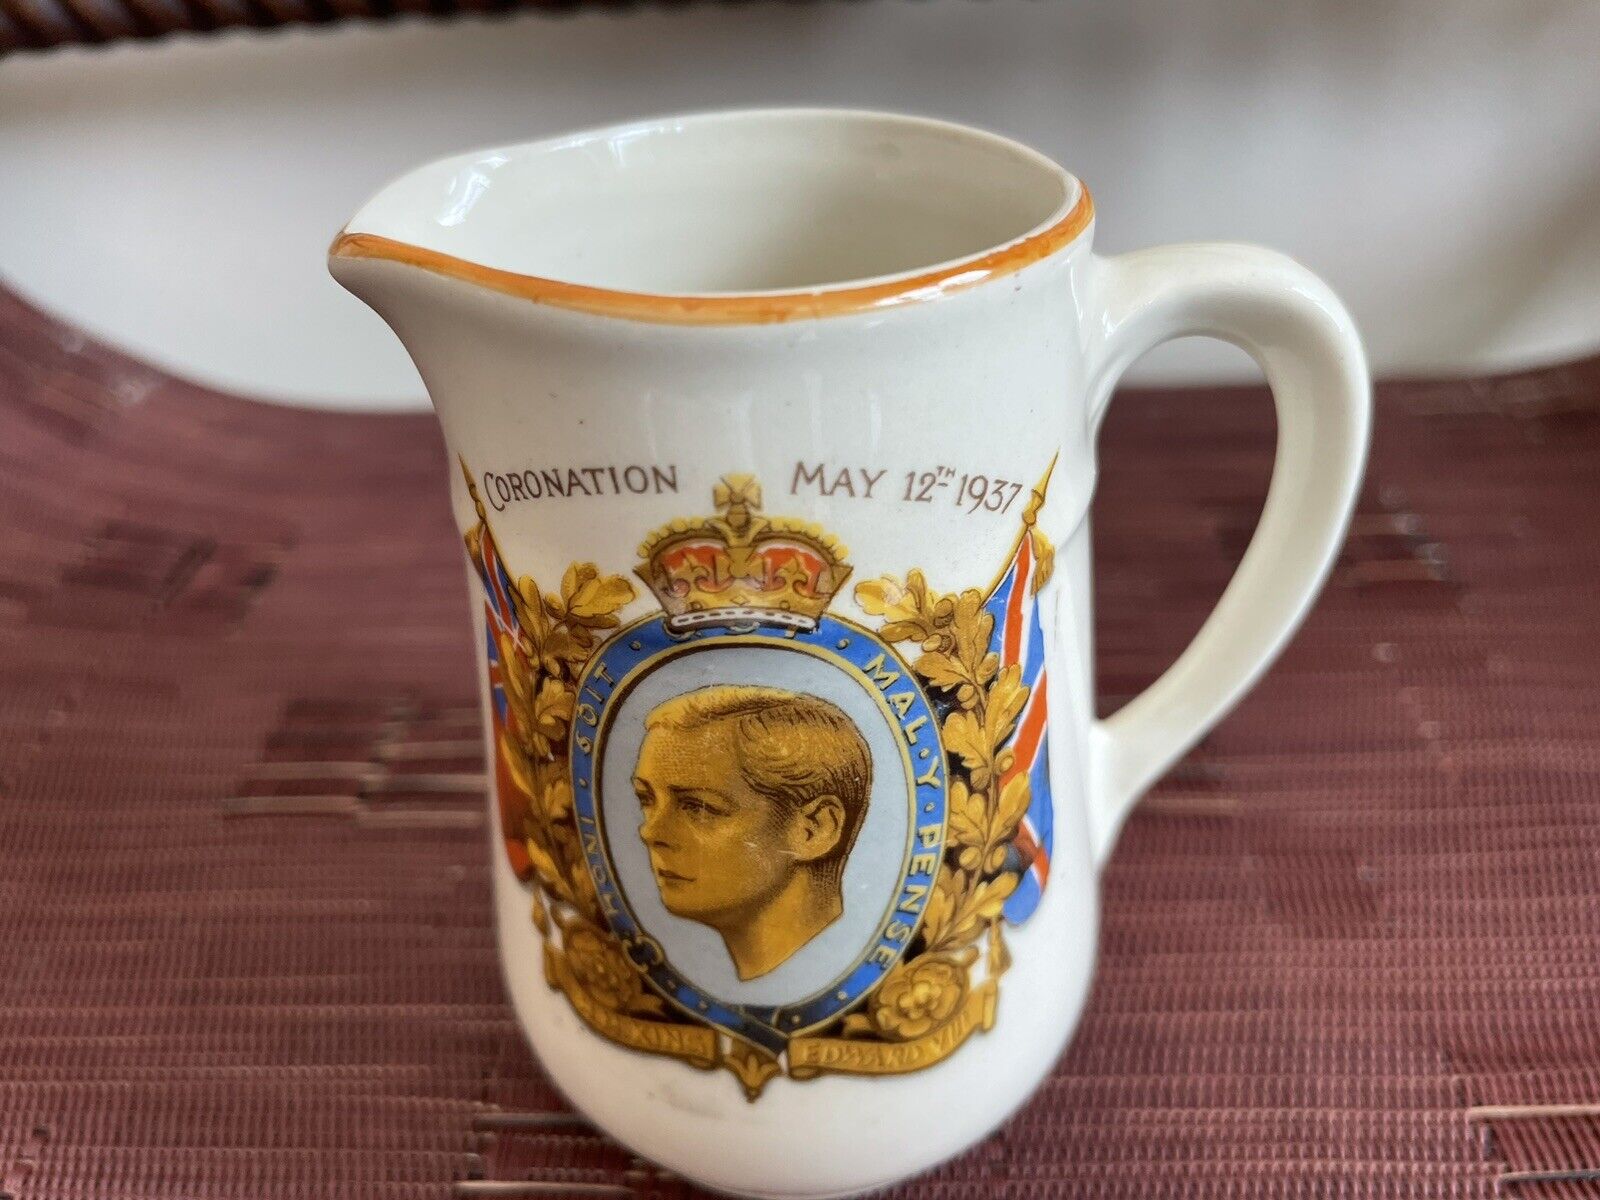 Abdicated King Edward VIII Coronation of May 1937 Small Pitcher- Made In England